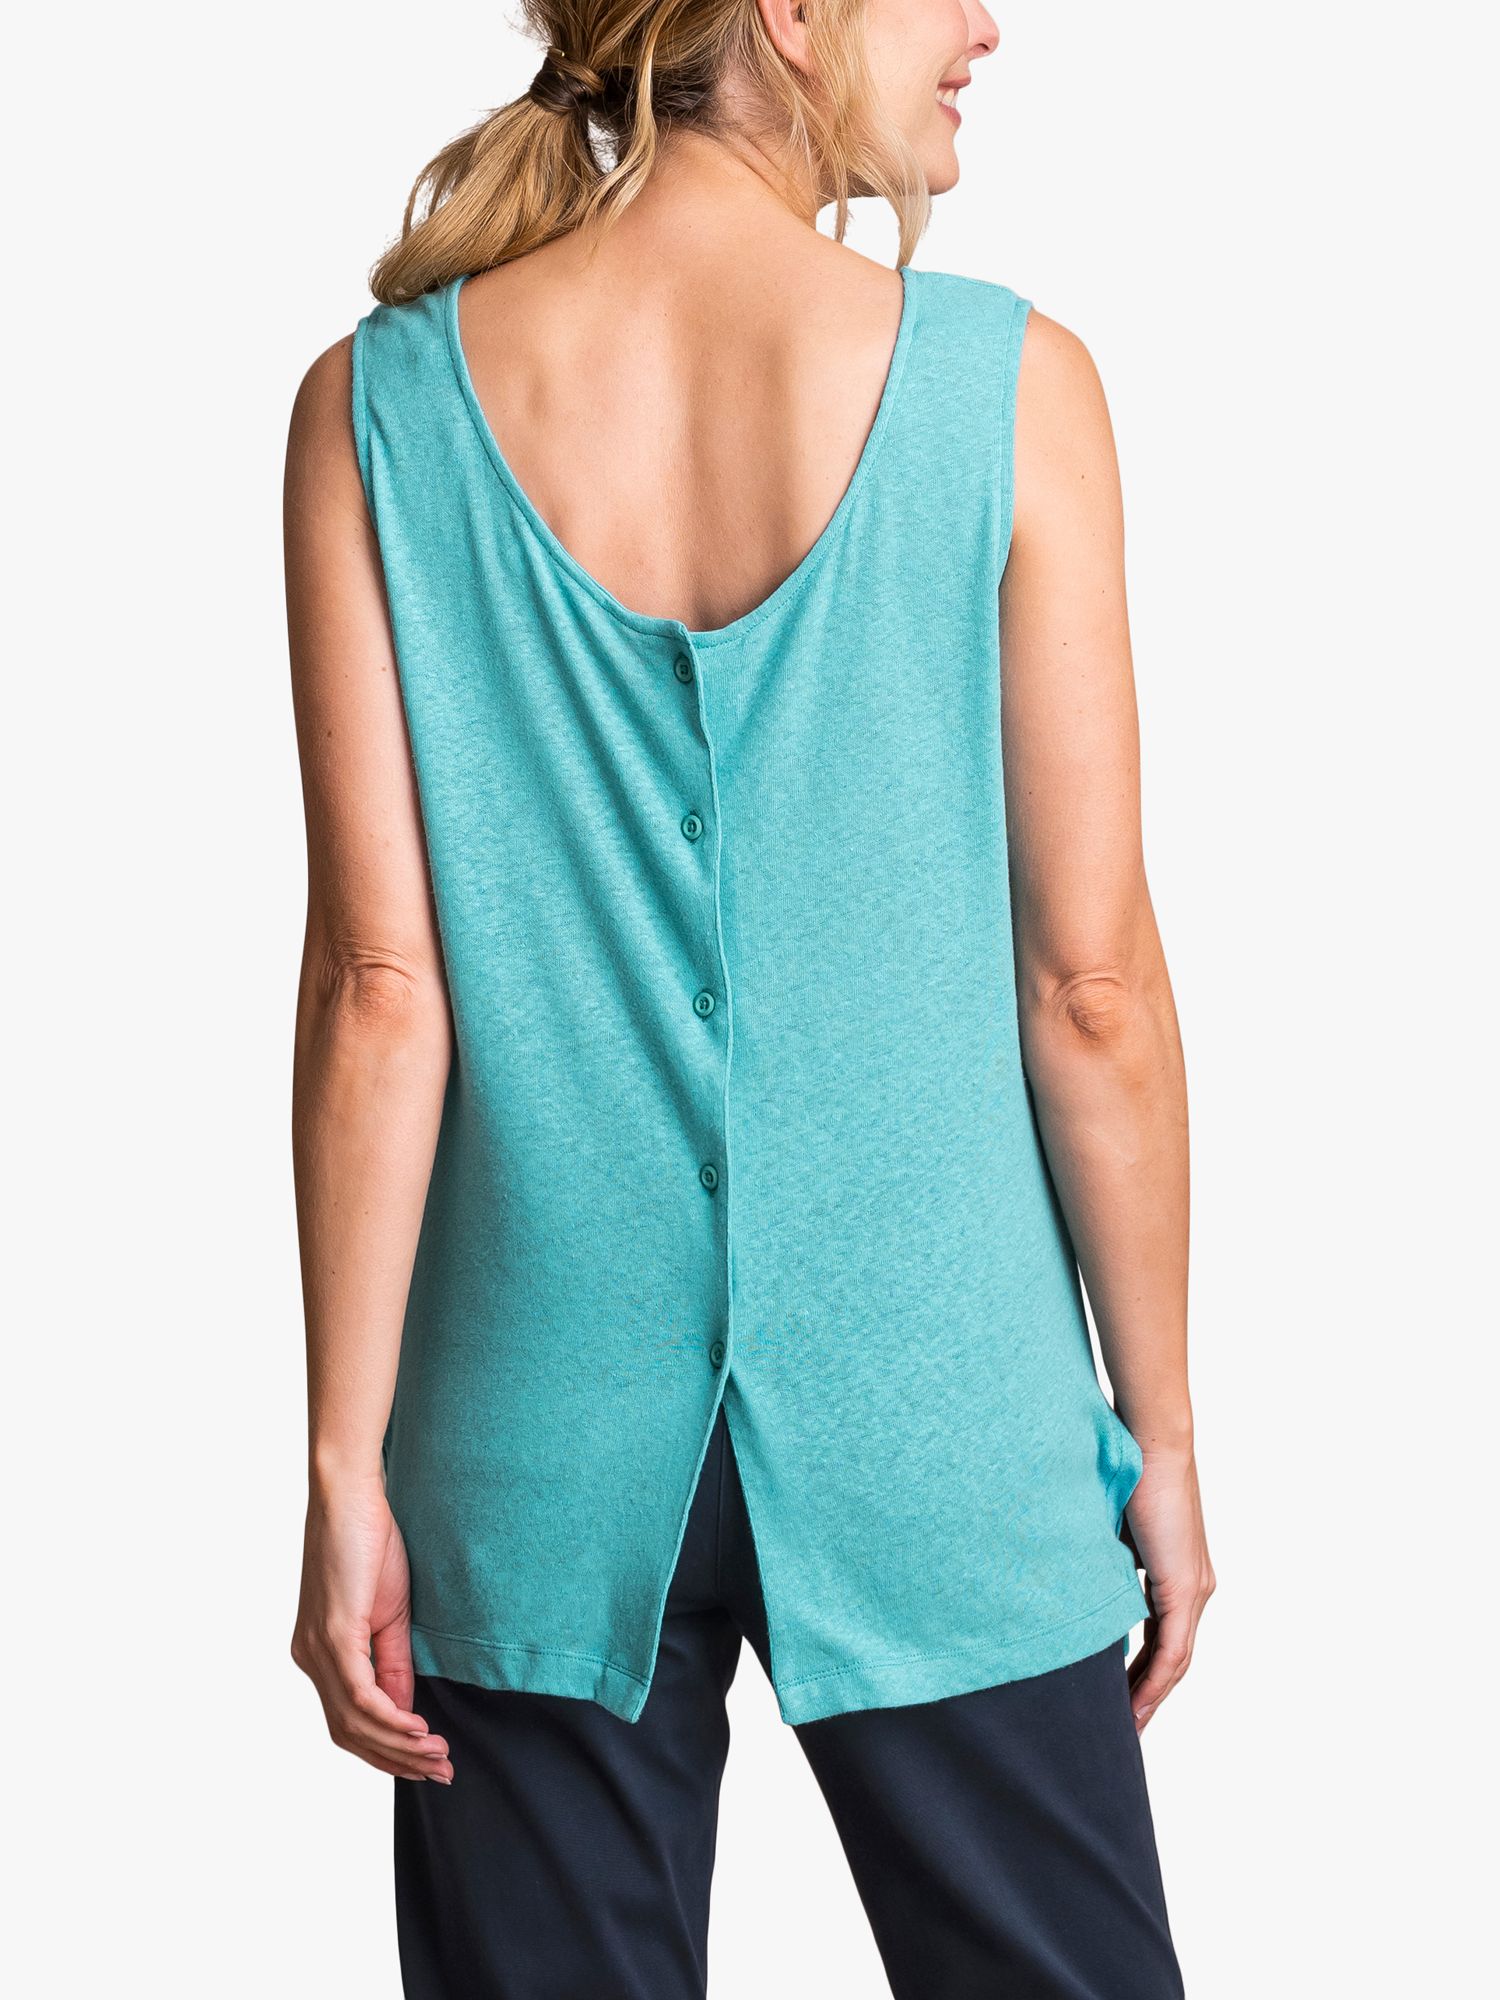 Celtic & Co. Linen and Cotton Scoop Neck Tunic, Sea Glass, 8